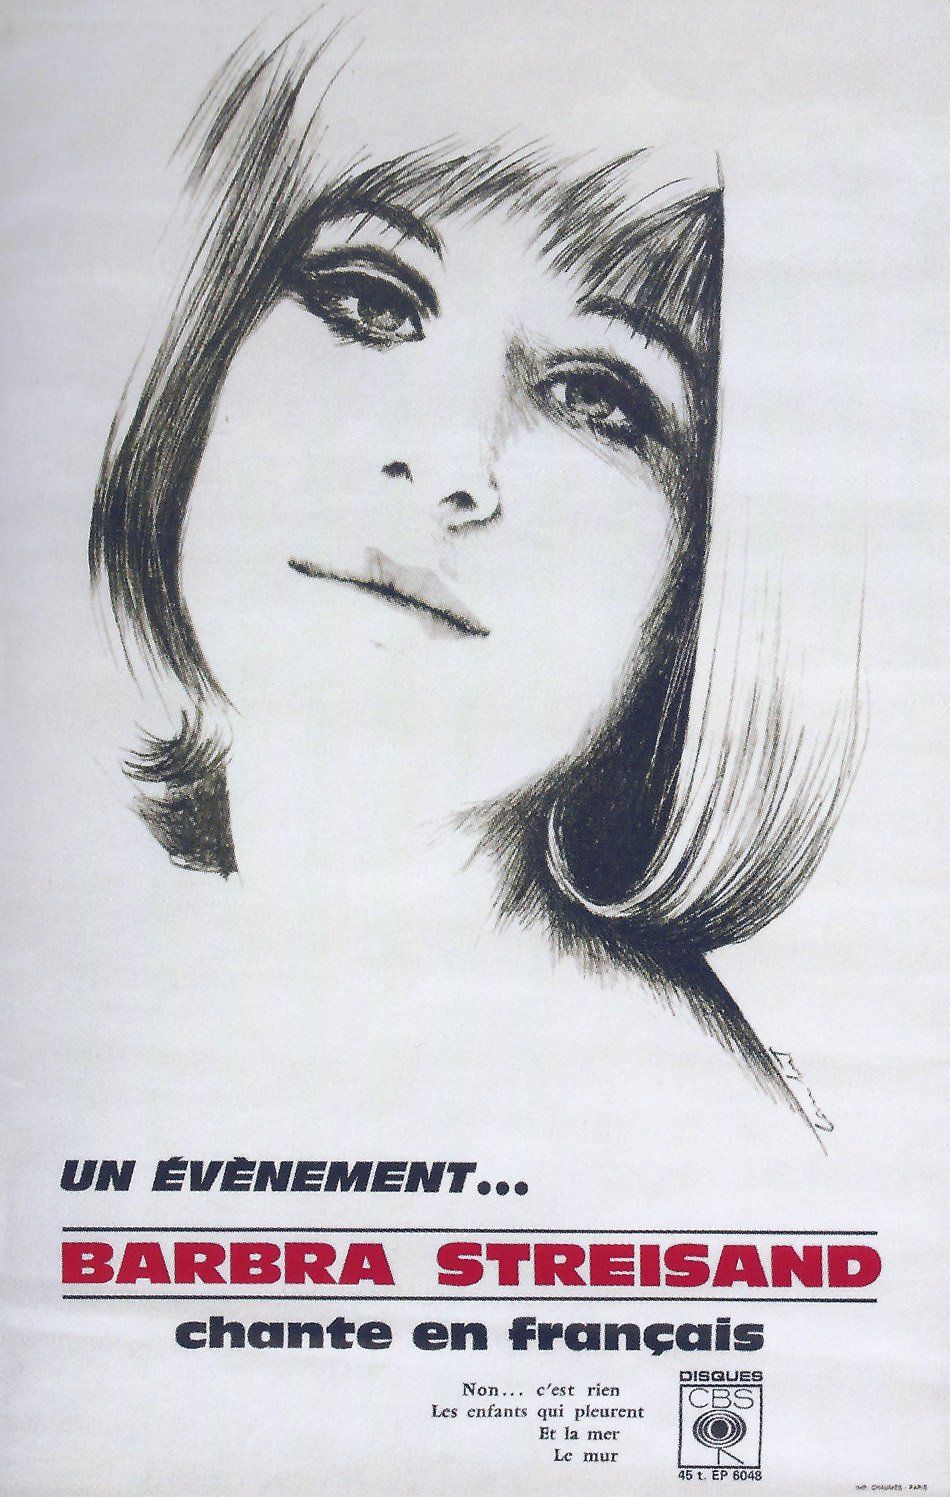 CBS ad for Barbra singing in French.